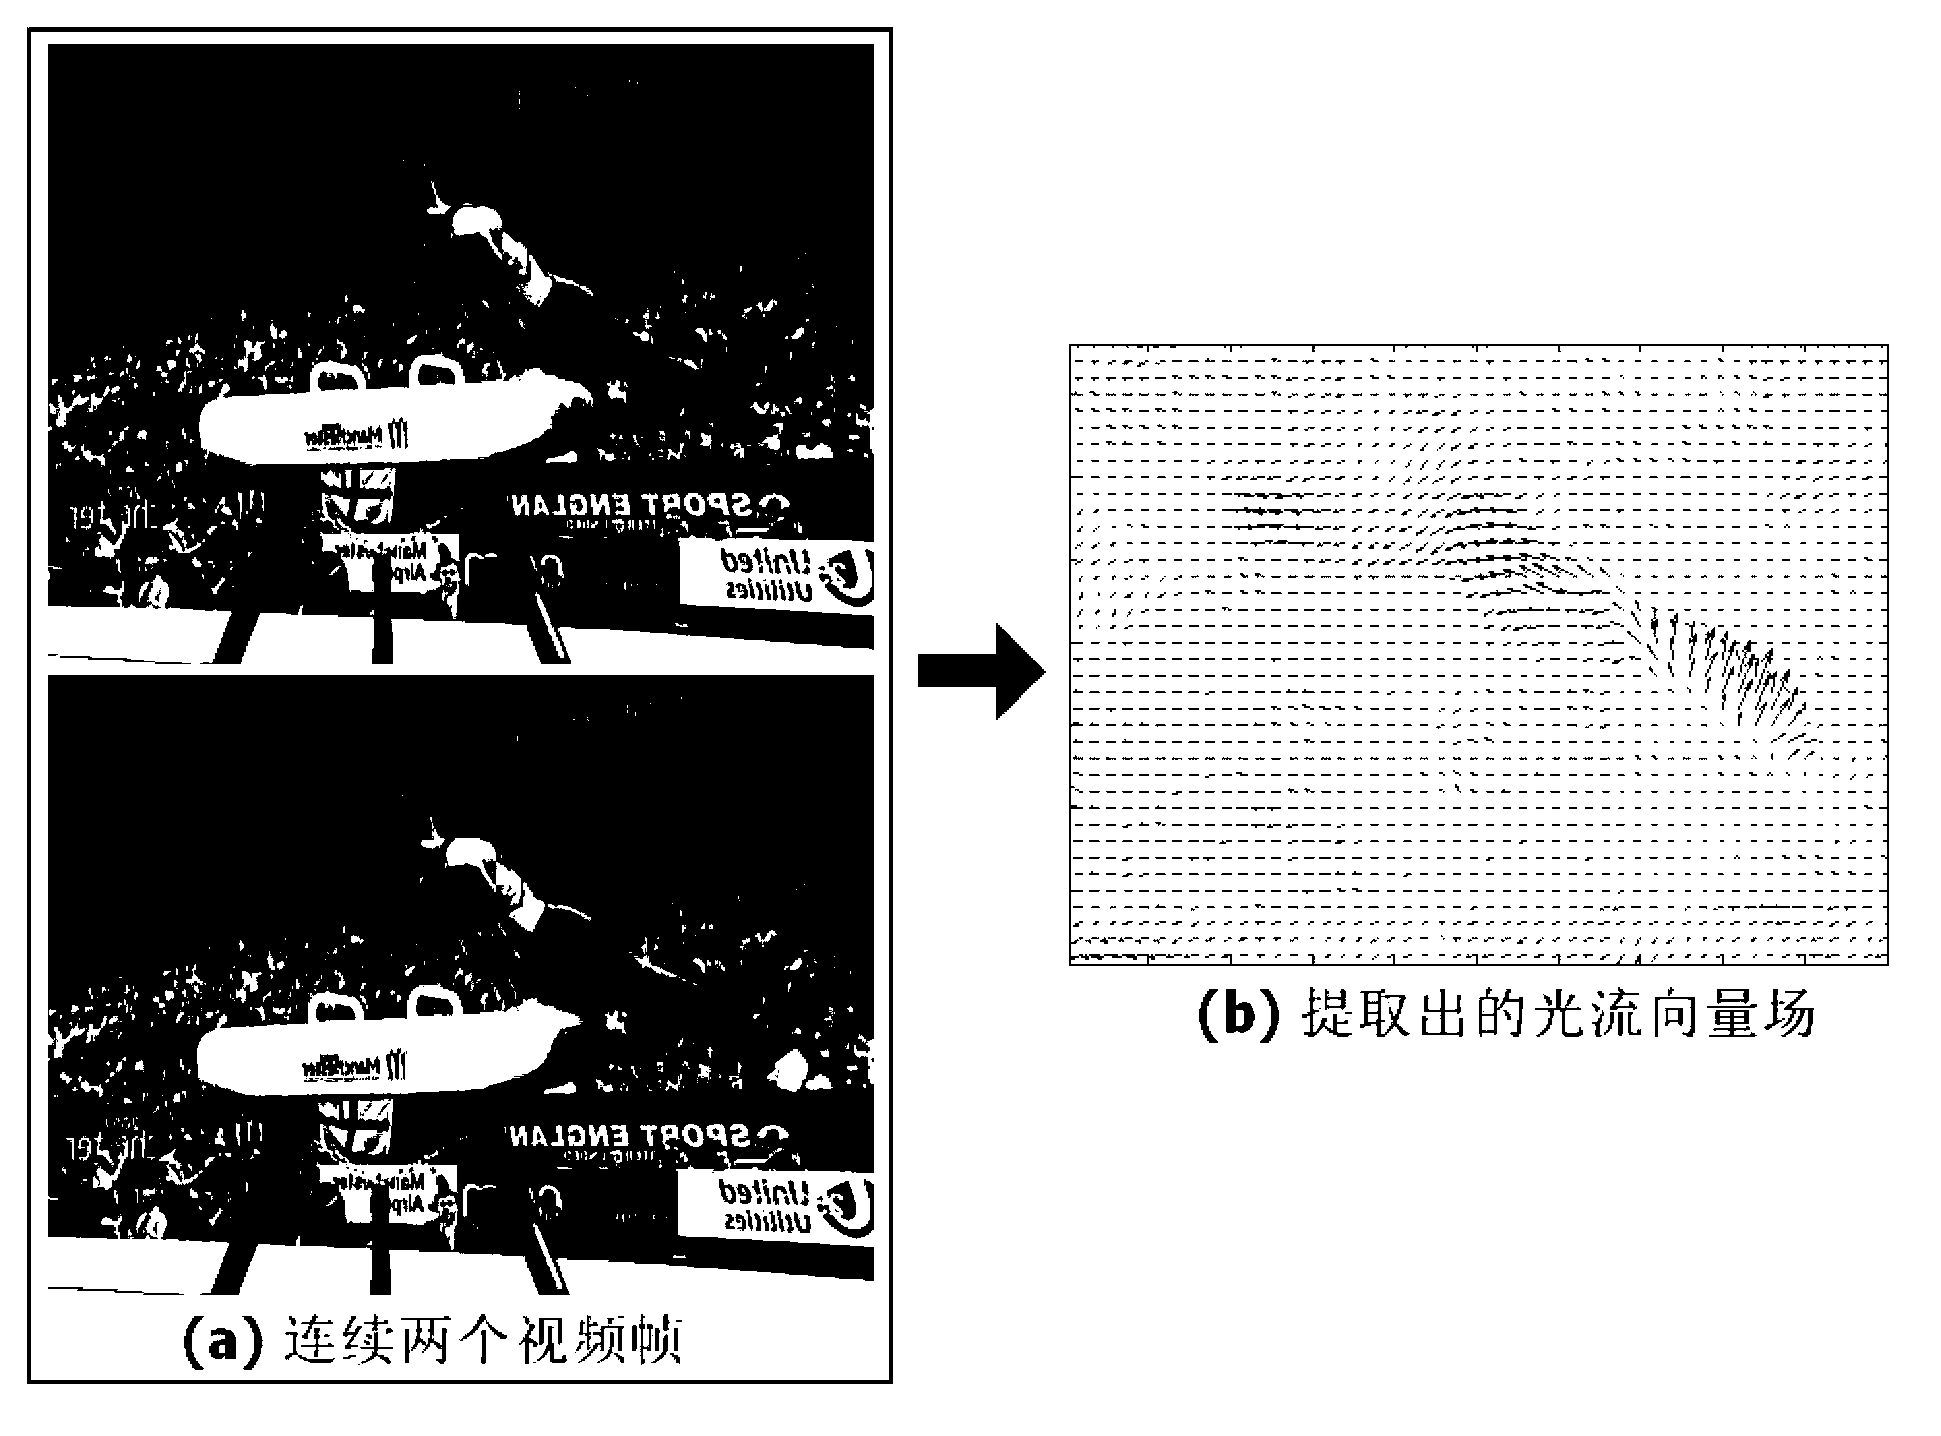 Video image significance detection method based on dynamic color association